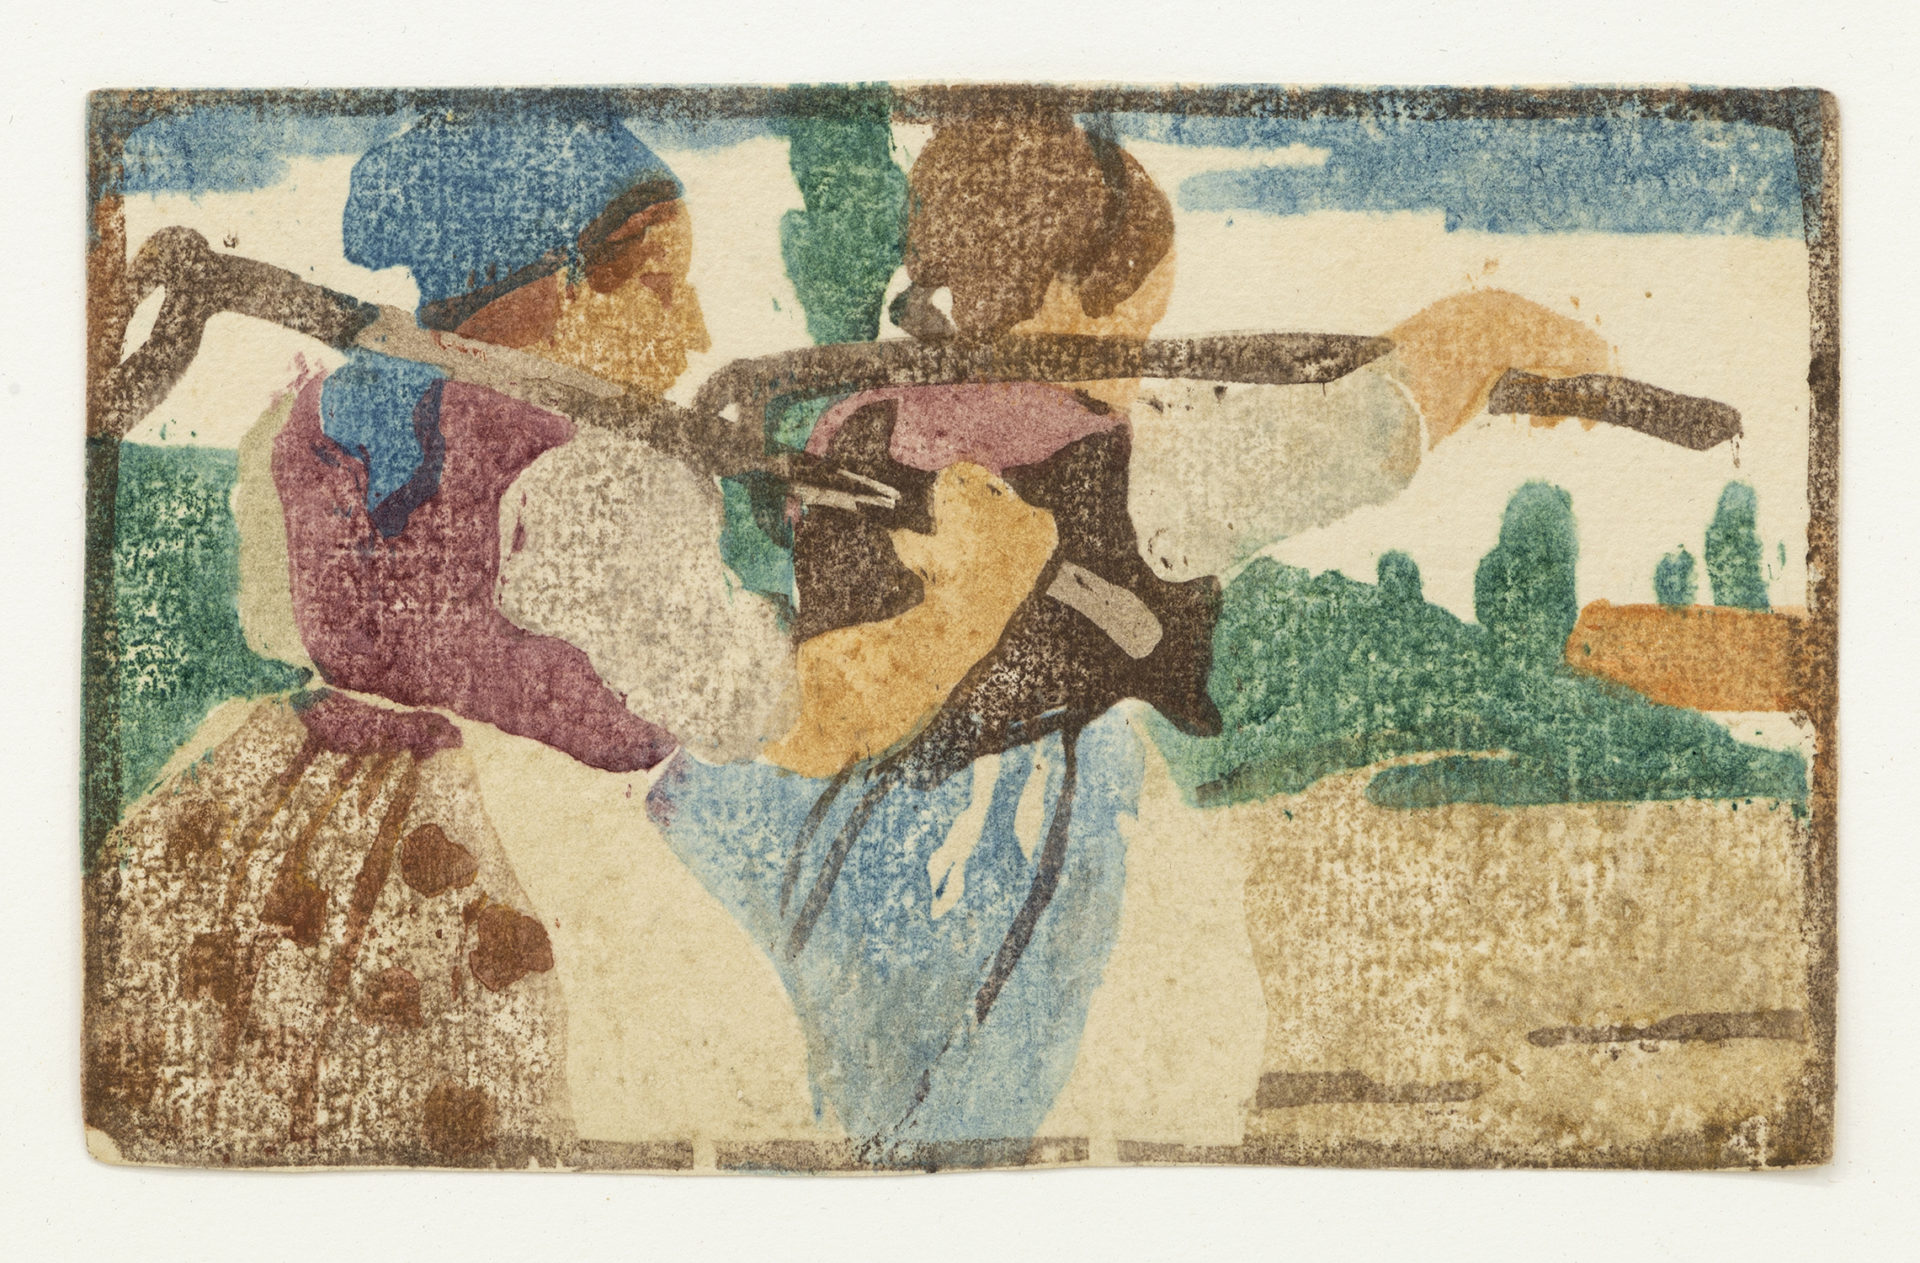 Untitled (Two women with hoes), 1906, Color woodblock, 4 x 6 inches (10.2 x 15.2 cm), Edition size unknown, rare